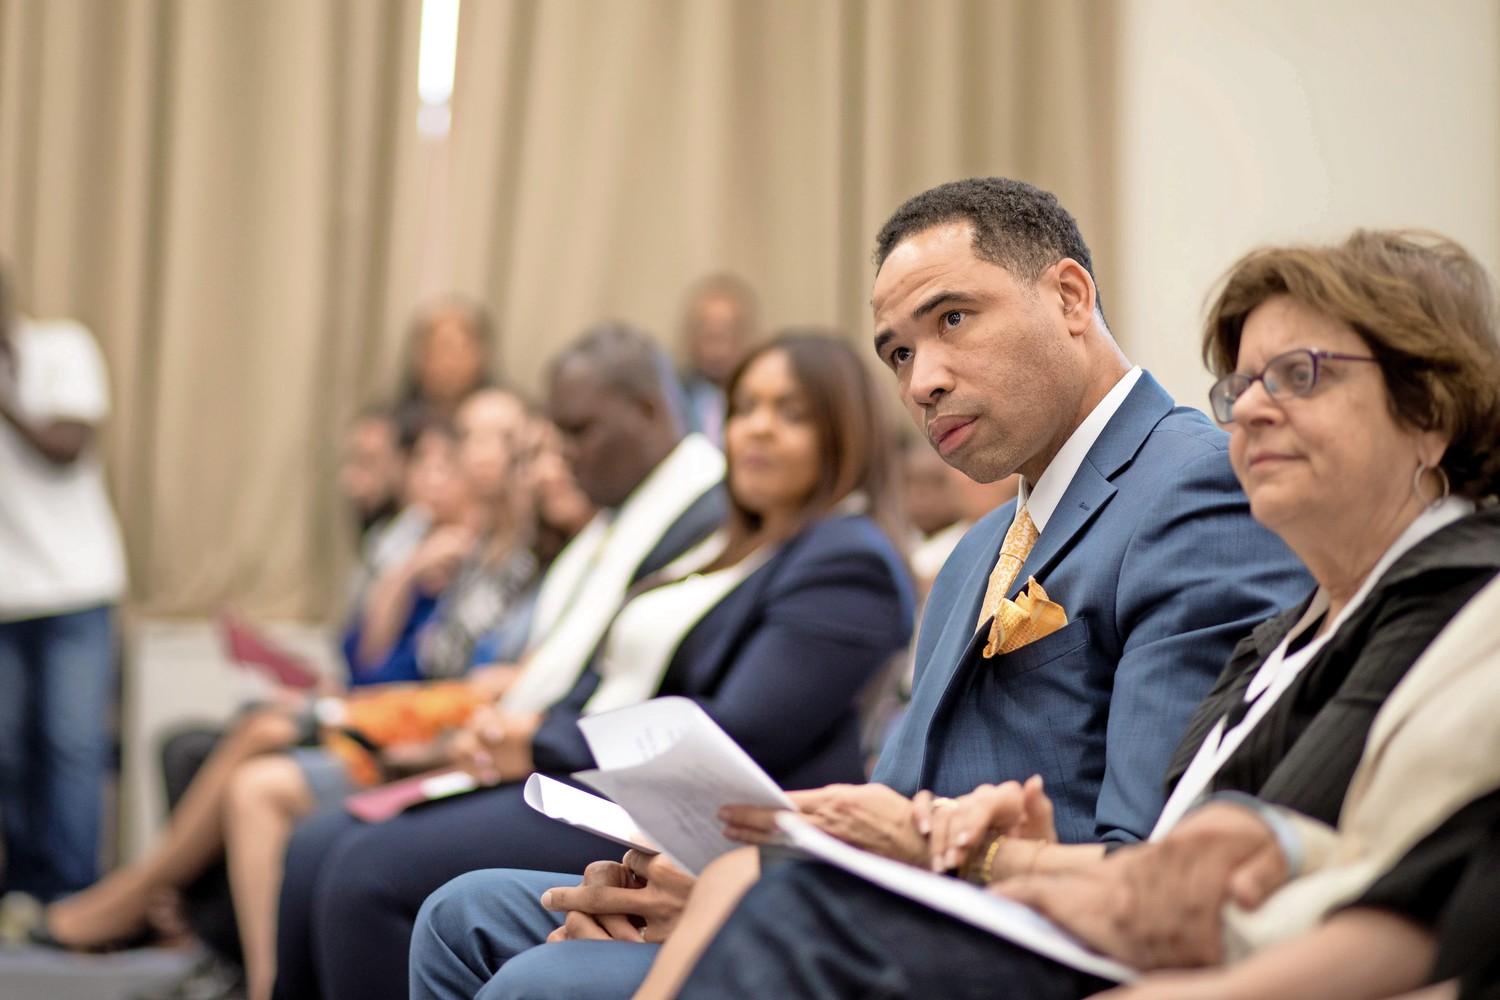 Lawrence Fauntleroy, a graduating student at Lehman College, listens as he is introduced at the school's first induction ceremony for adult degree program students into the national honor society, Upsilon Sigma of Alpha Sigma Lambda.